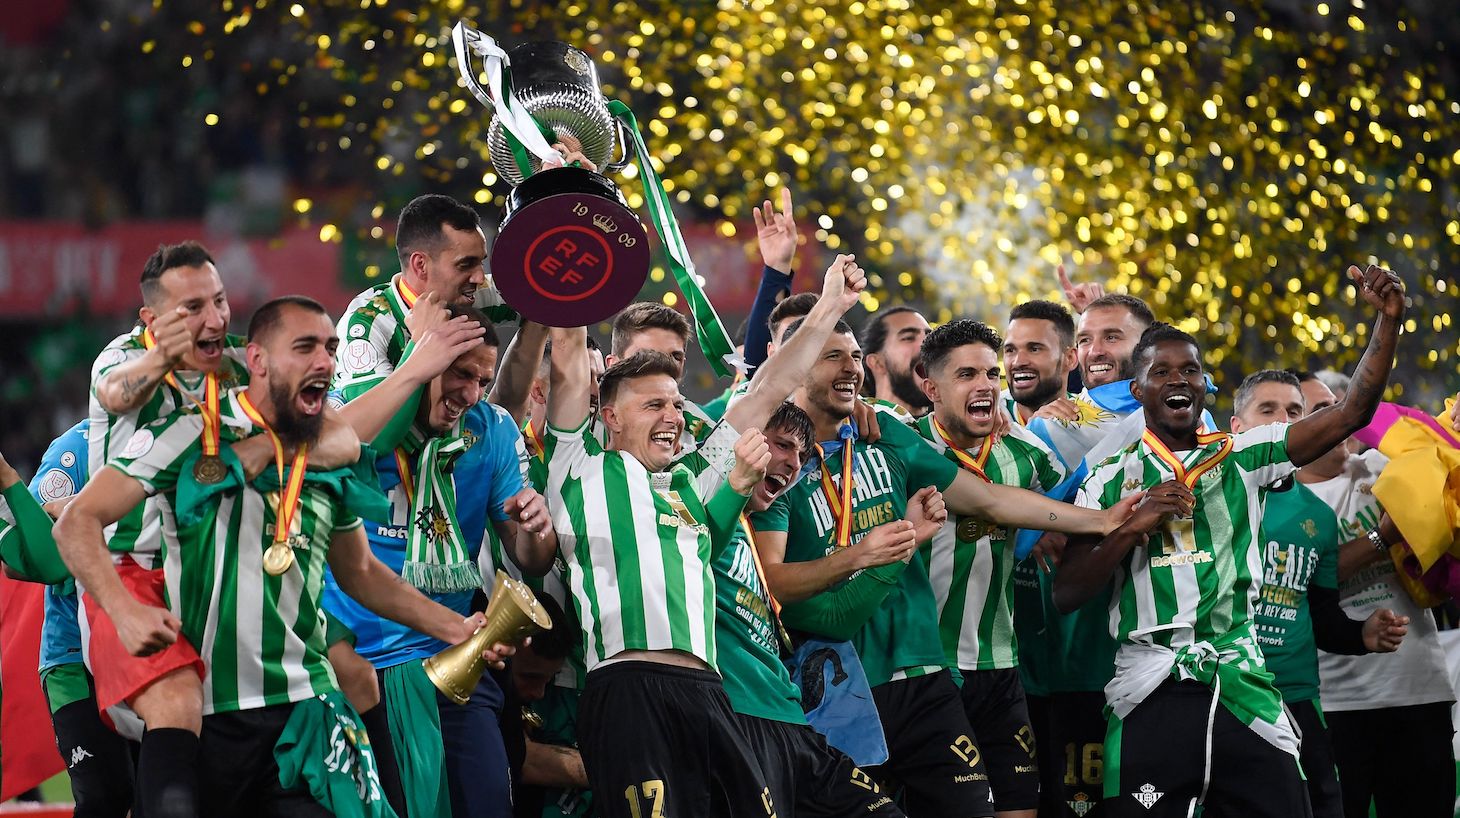 Real Betis' Spanish midfielder Joaquin raises the winner's trophy as he celebrates with teammates their victory after winning the Spanish Copa del Rey (King's Cup) final football match between Real Betis and Valencia CF at La Cartuja Stadium in Seville, on April 23, 2022.